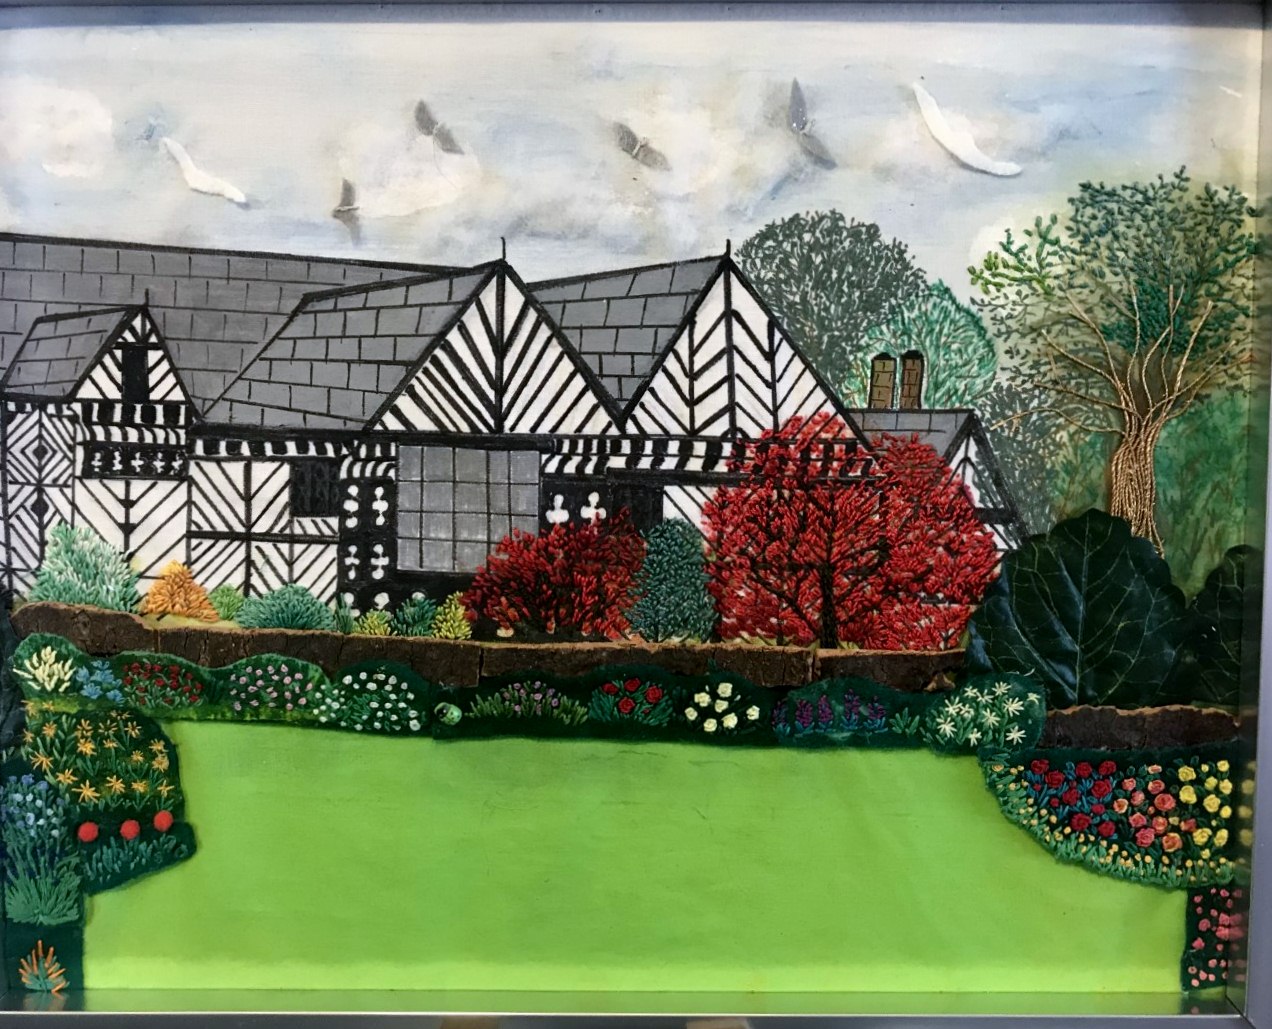 SPEKE HALL AND GARDENS by Kathy Green, painting on fabric embellished with embroidery,MEG display at NW Regional Day 2021